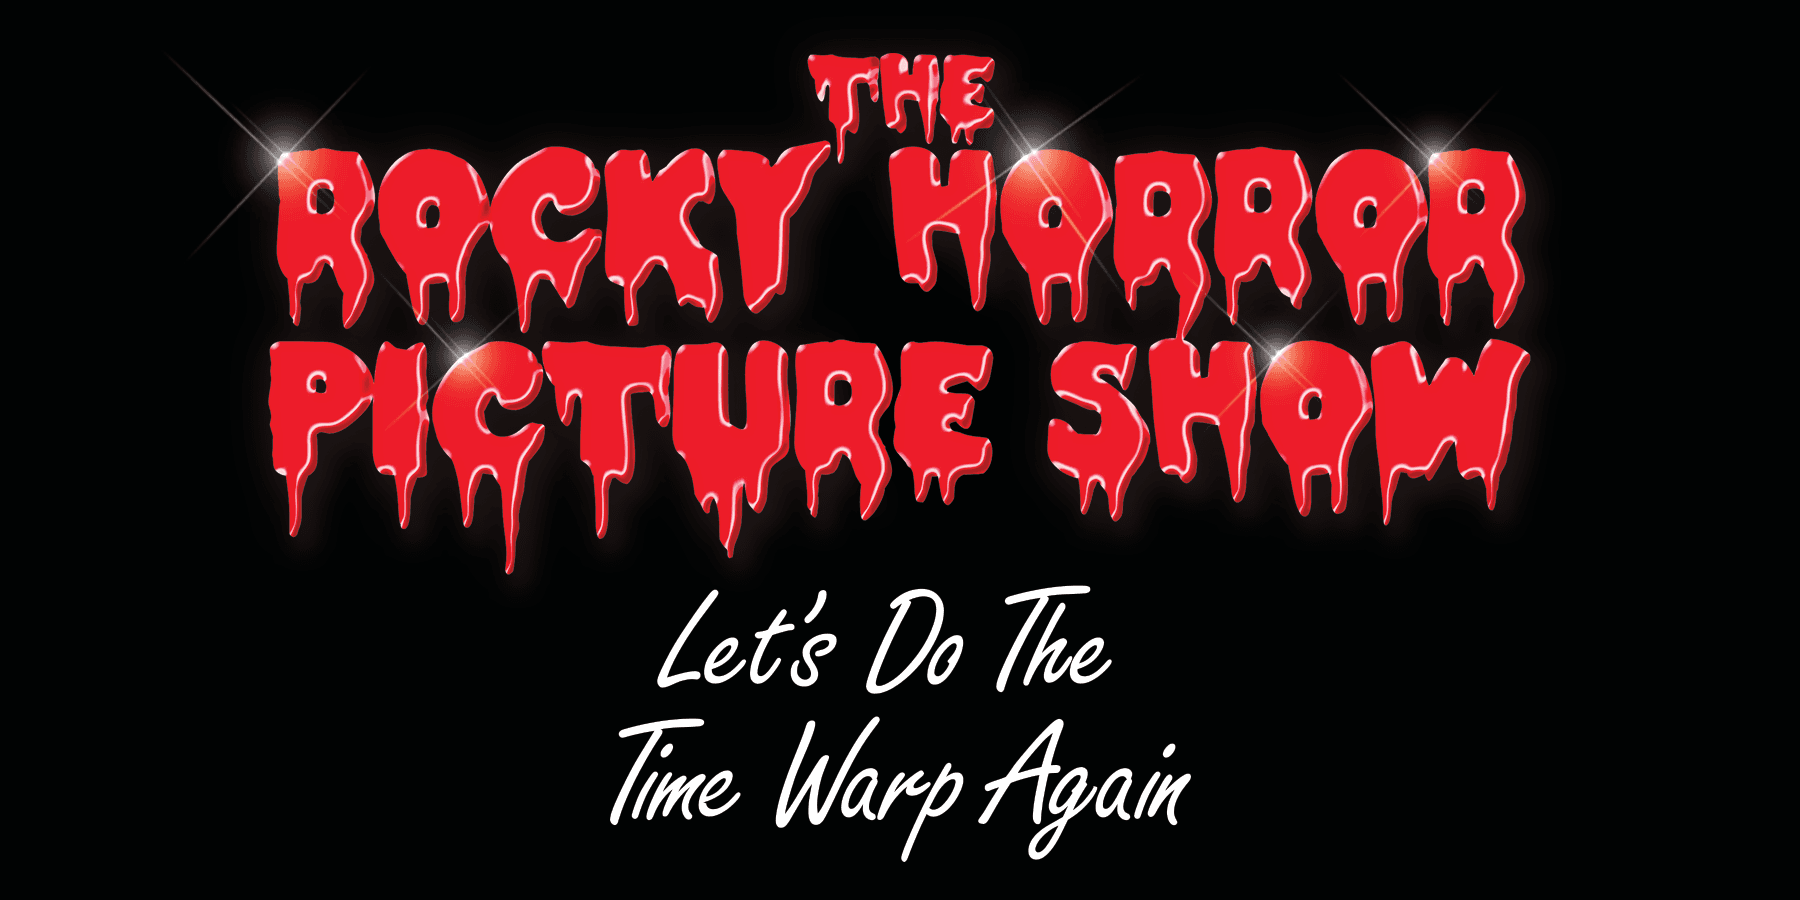 The Rocky Horror Picture Show: Let's Do the Time Warp Again logo